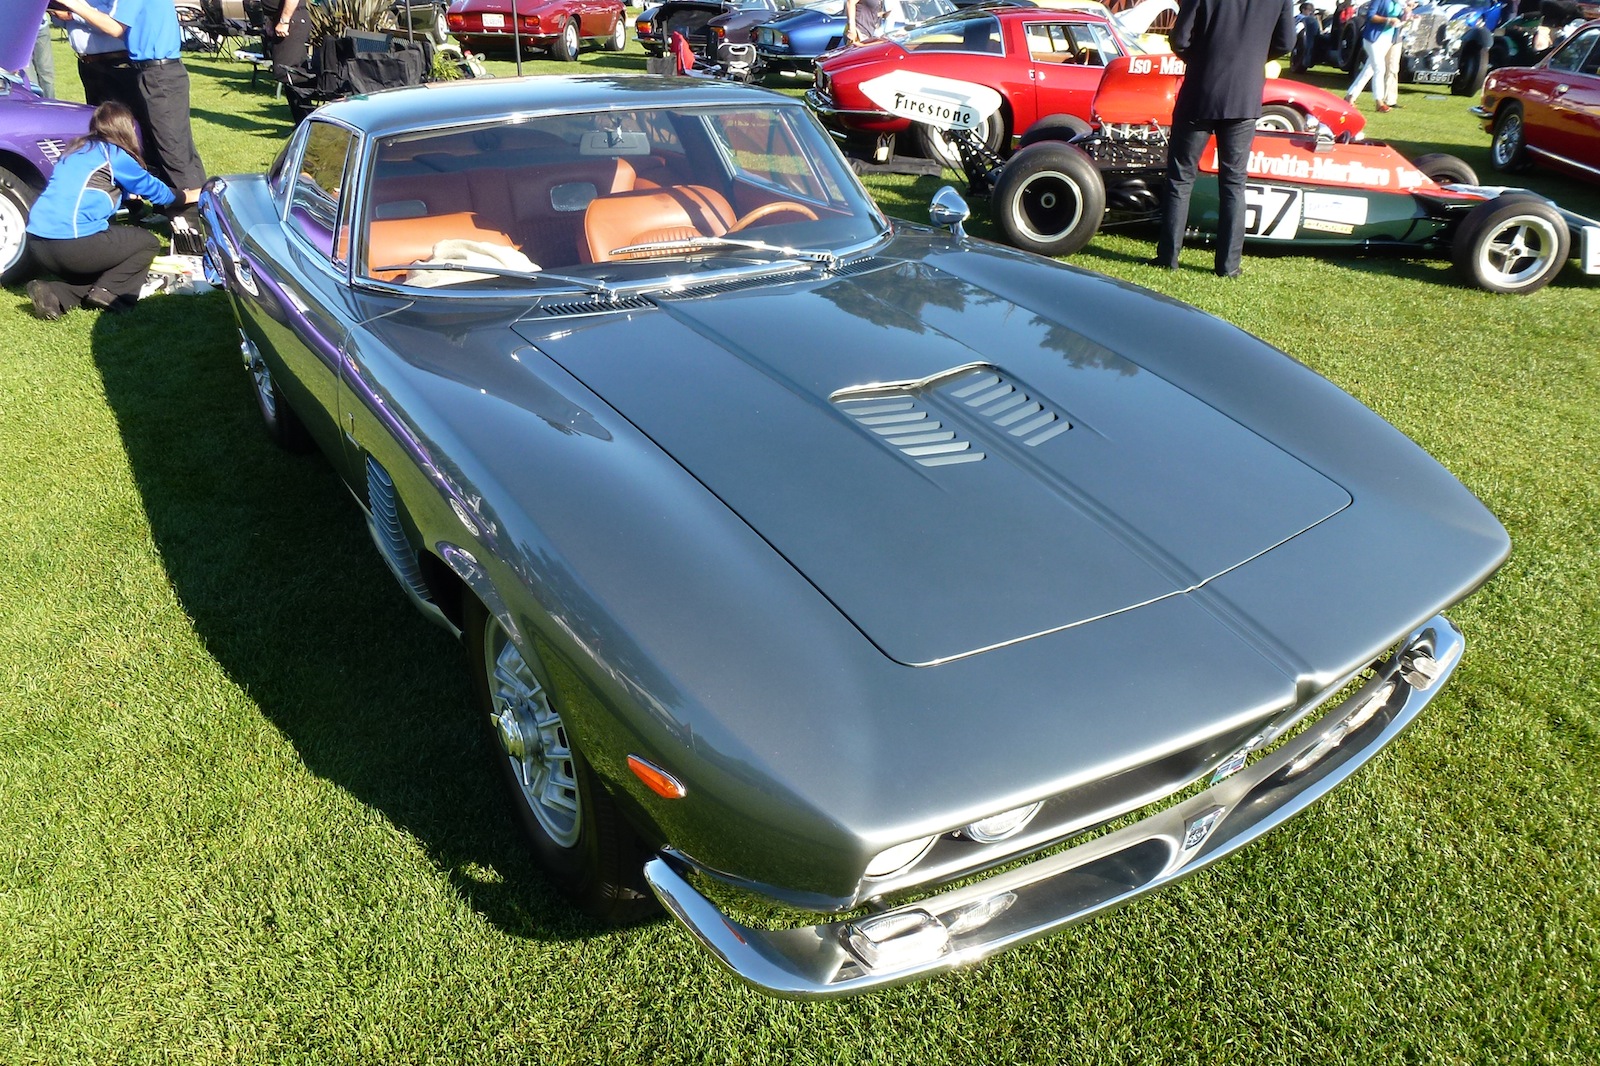 Prototype And Production - A Few Differences For The Iso Grifo